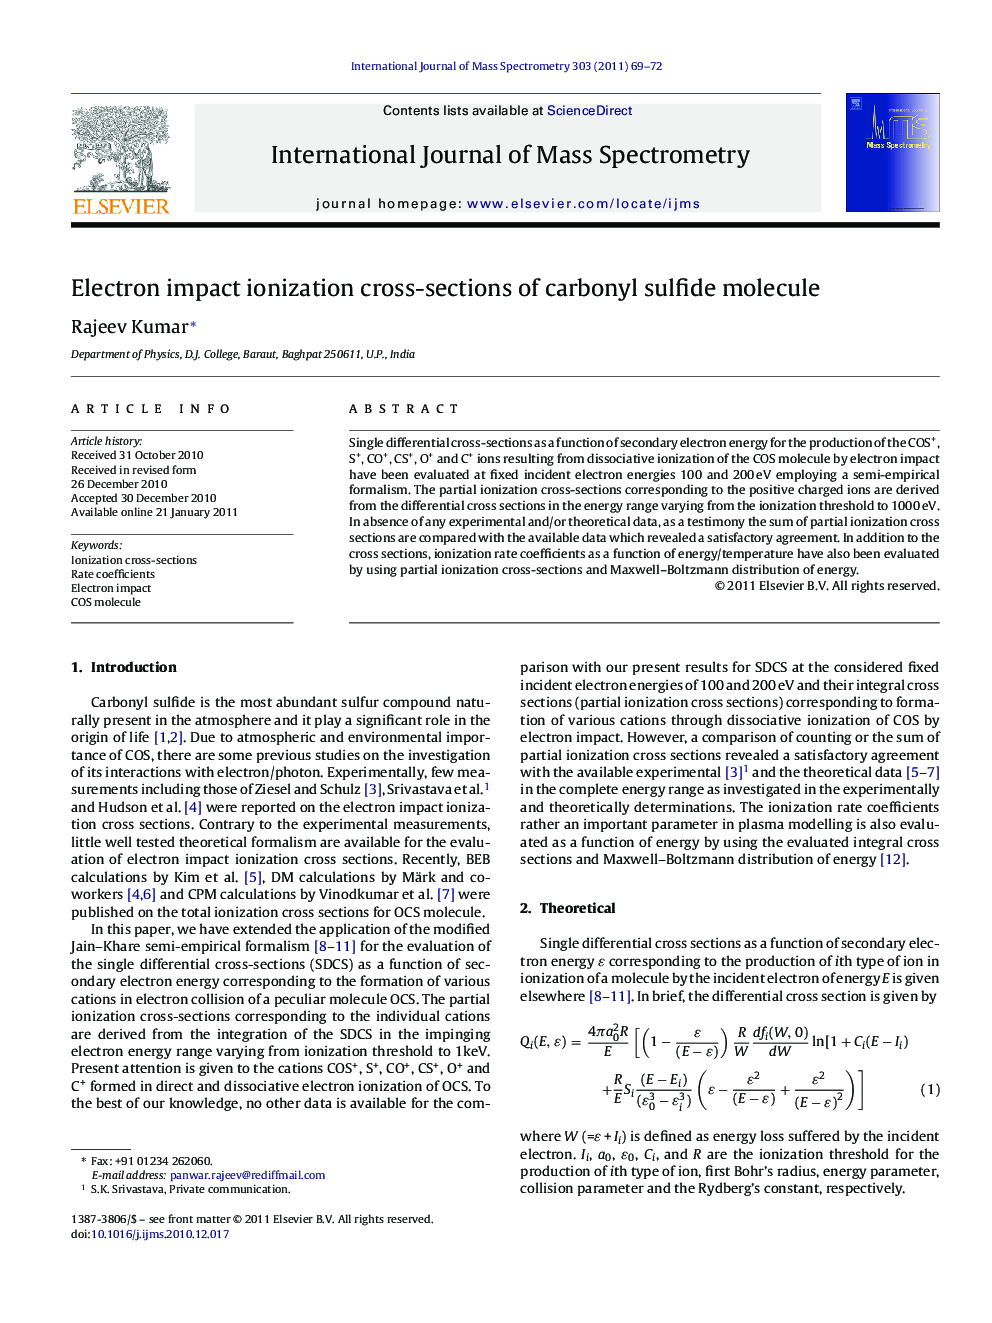 Electron impact ionization cross-sections of carbonyl sulfide molecule